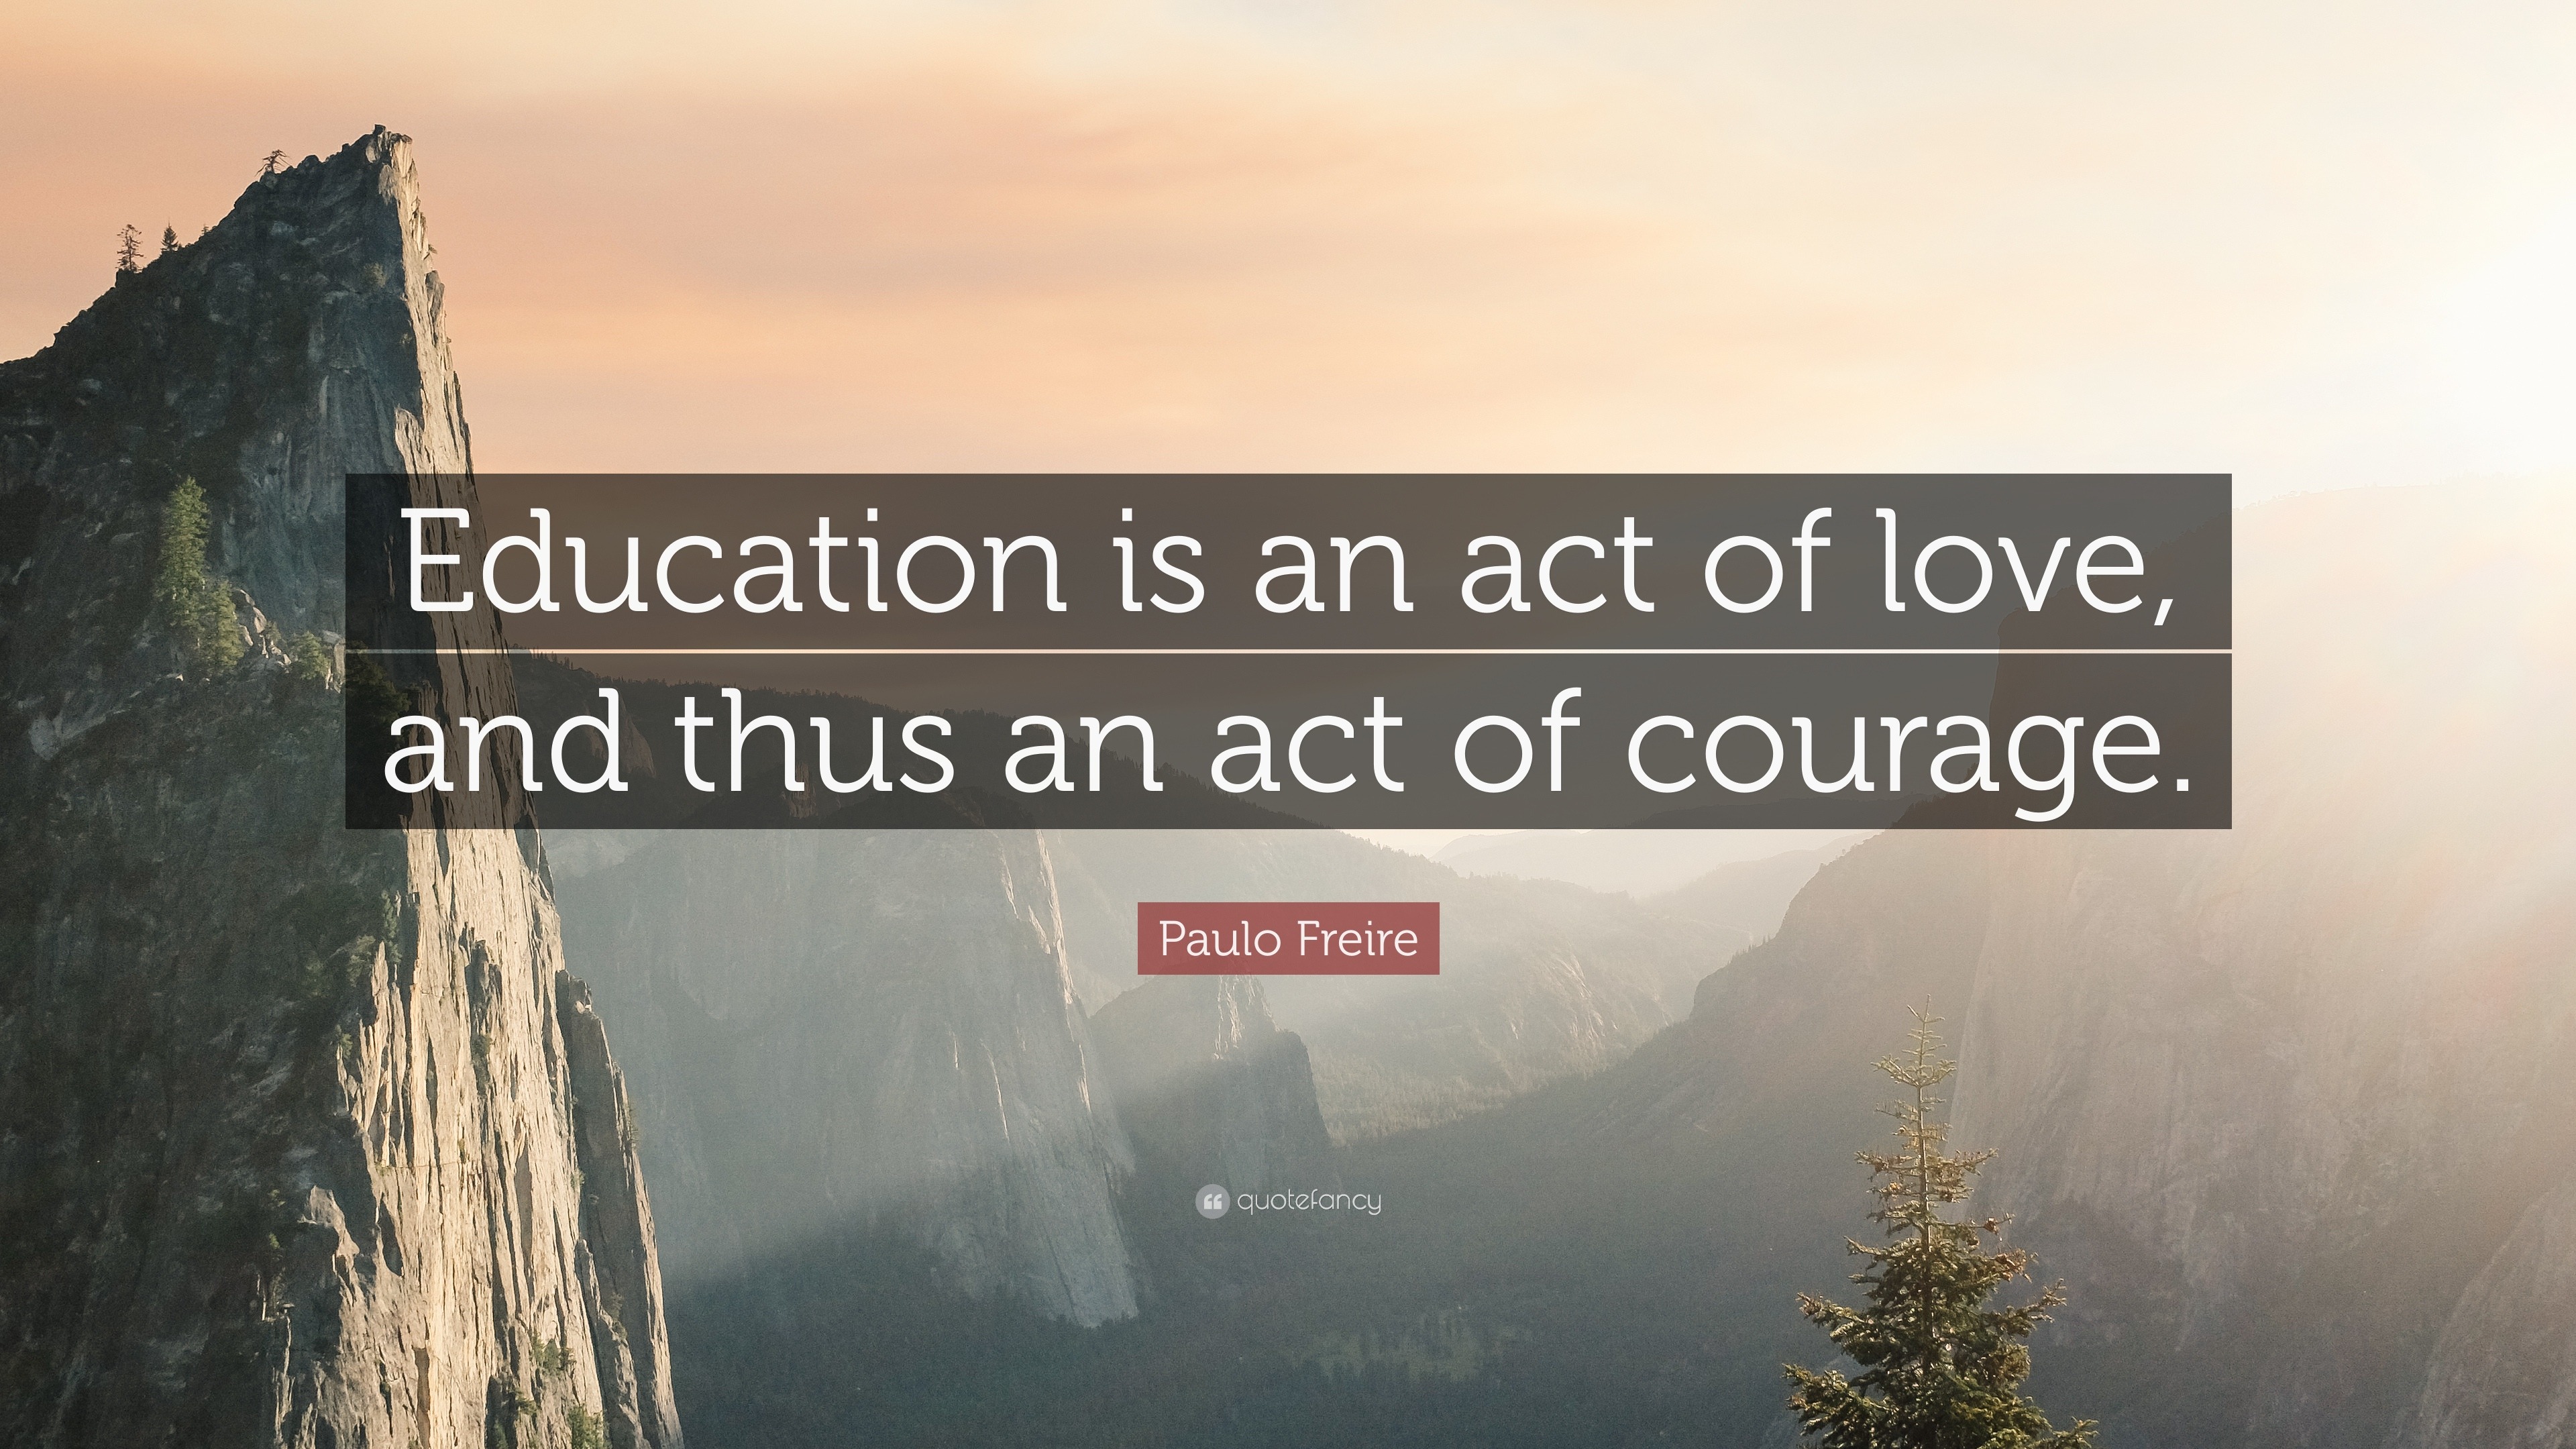 Paulo Freire Quote: “Education is an act of love, and thus an act of